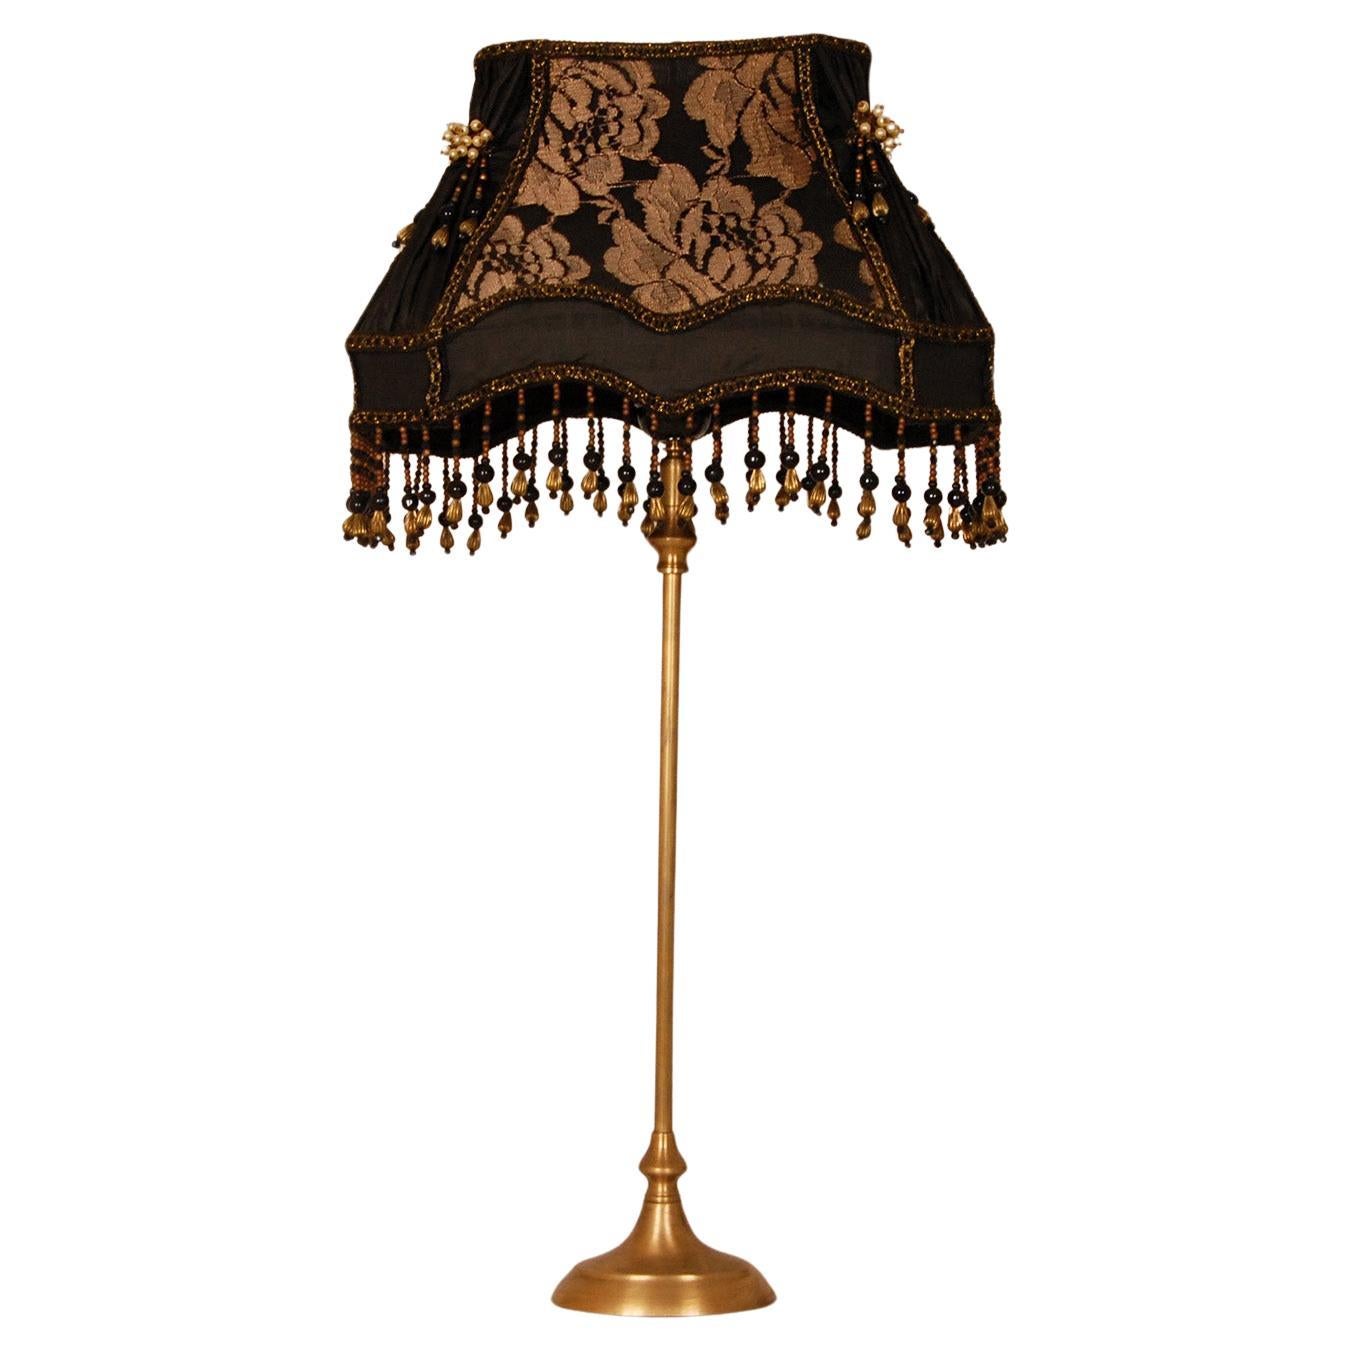 Vintage French Baroque Lamp Fringed Beaded 1970s Gold and Black For Sale